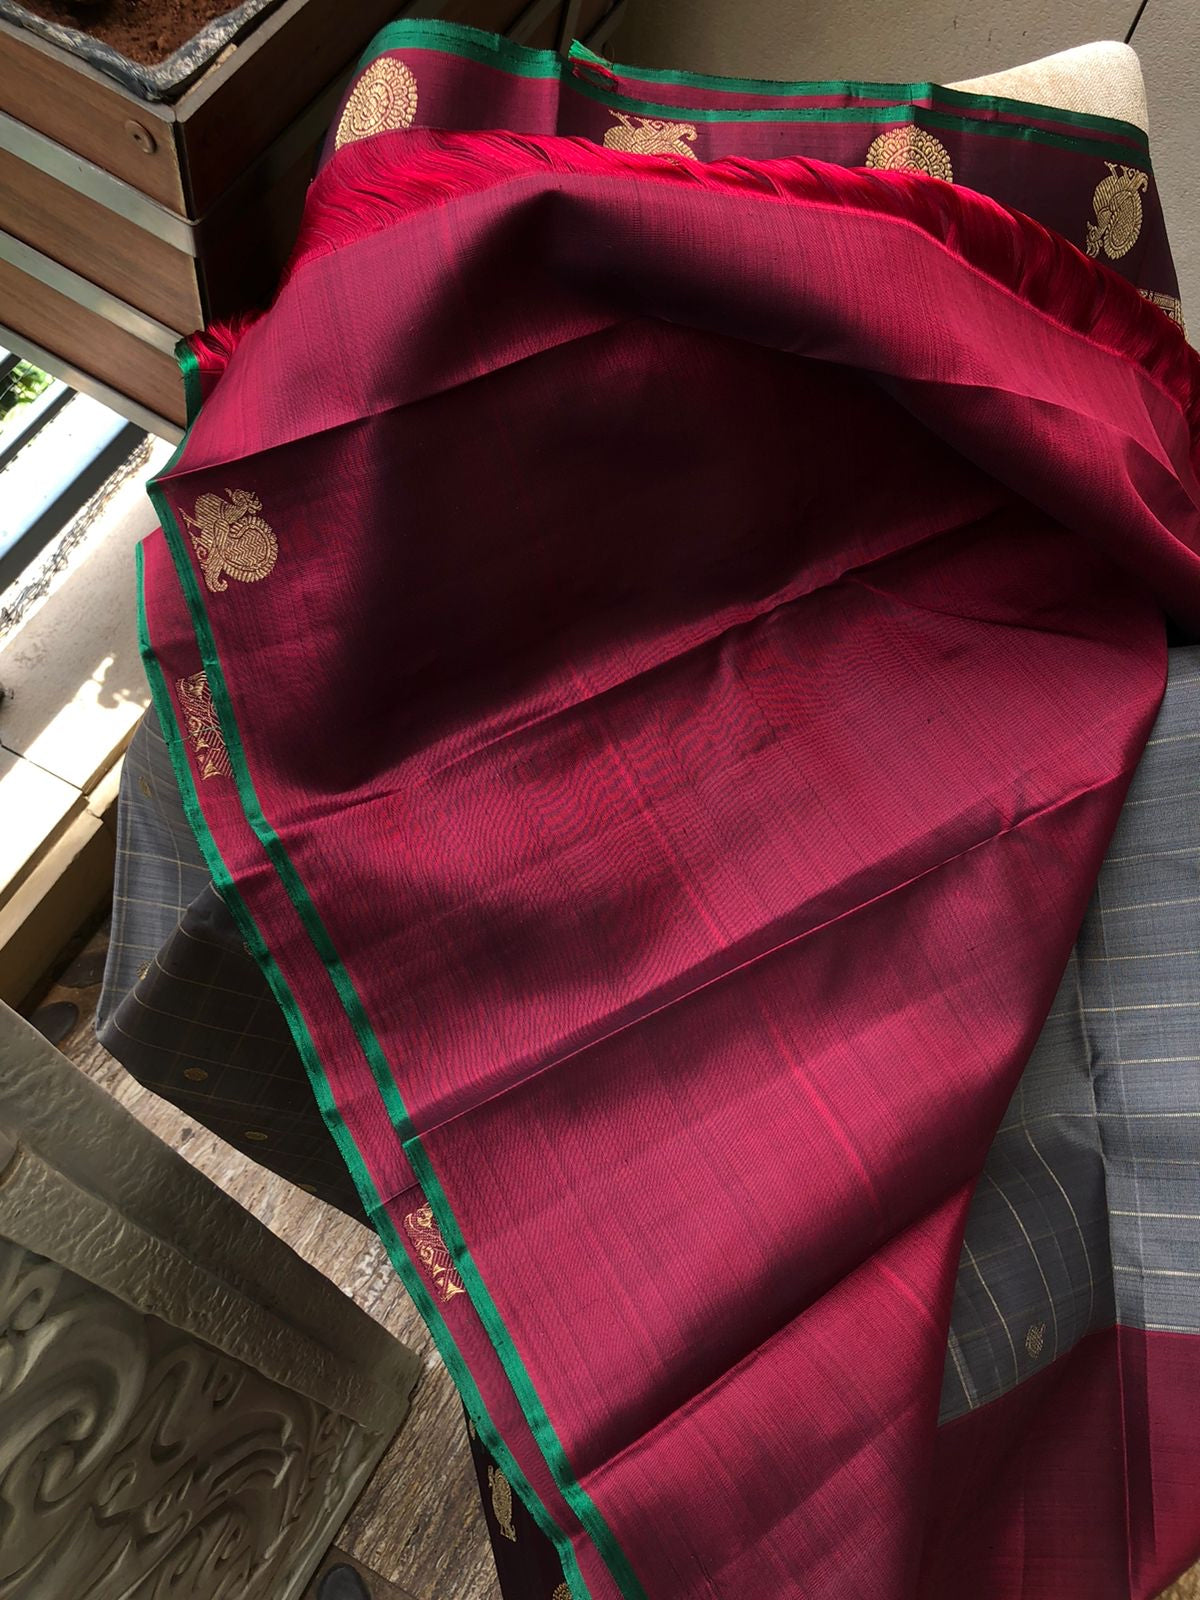 Darker Kanchivarams - unusual and rare find grey with a tint of elachi green chex buttas woven body with deepest maroon mayil chackaram borders